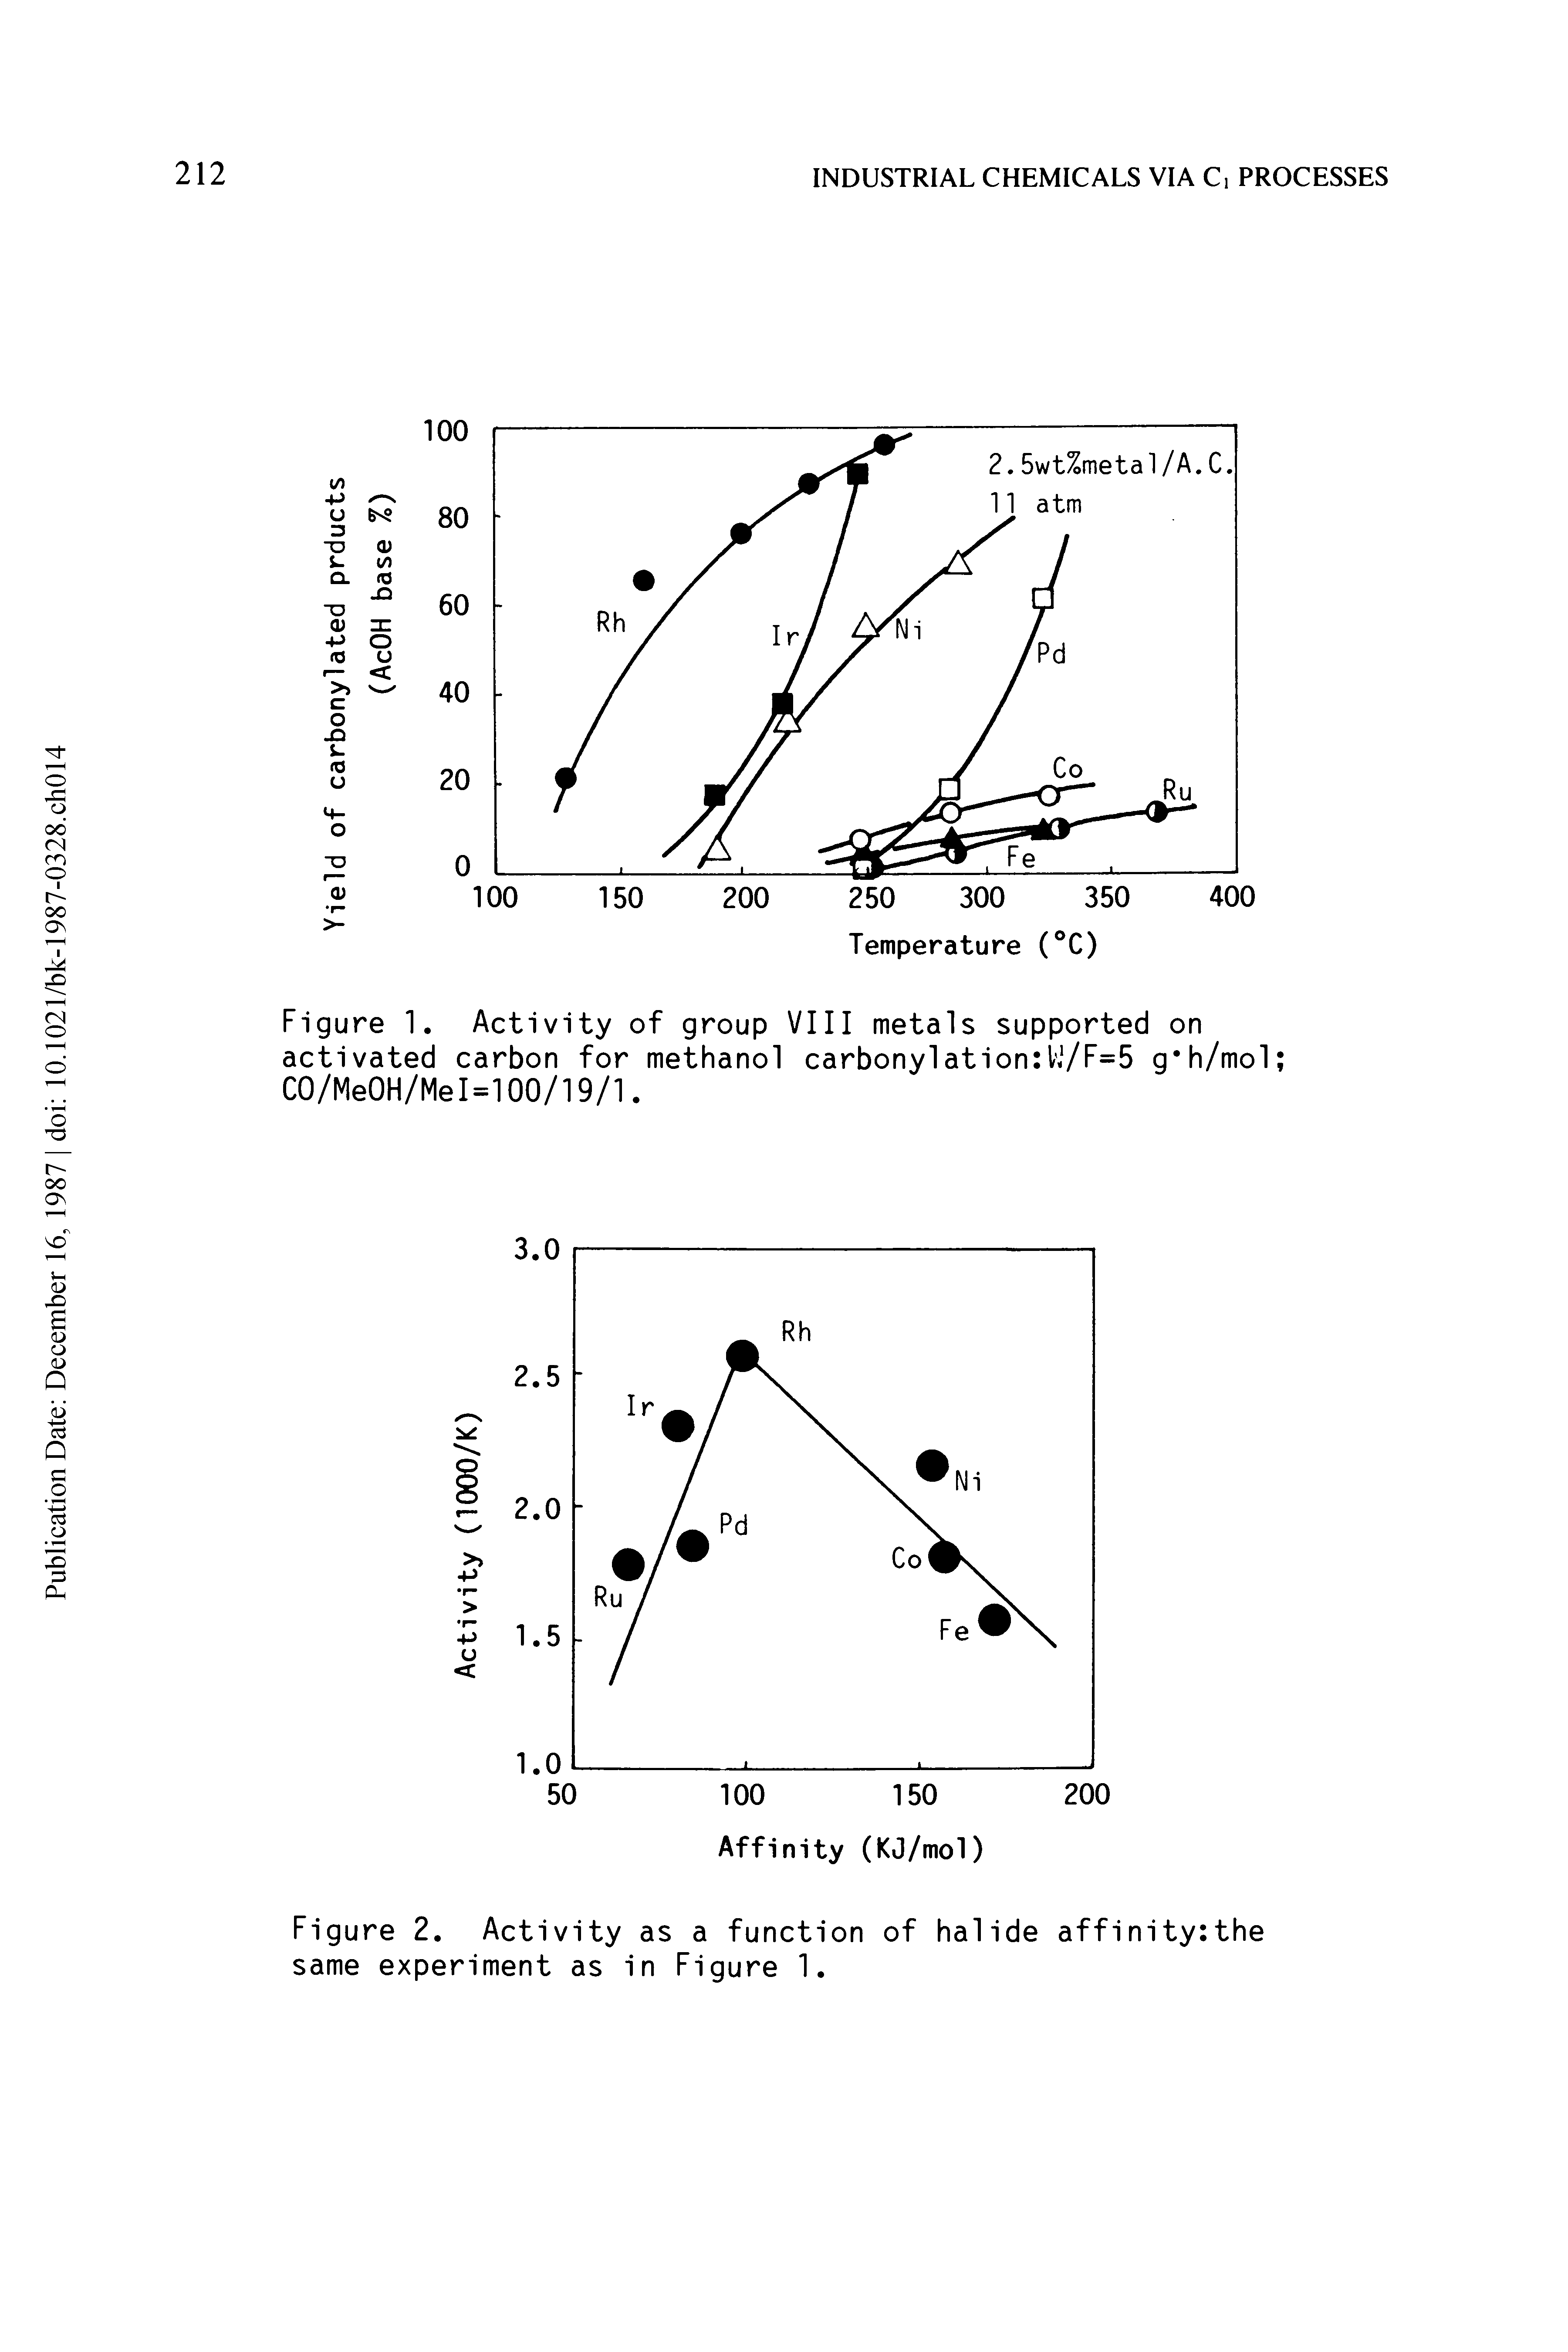 Figure 2. Activity as a function of halide affinity the same experiment as in Figure 1.